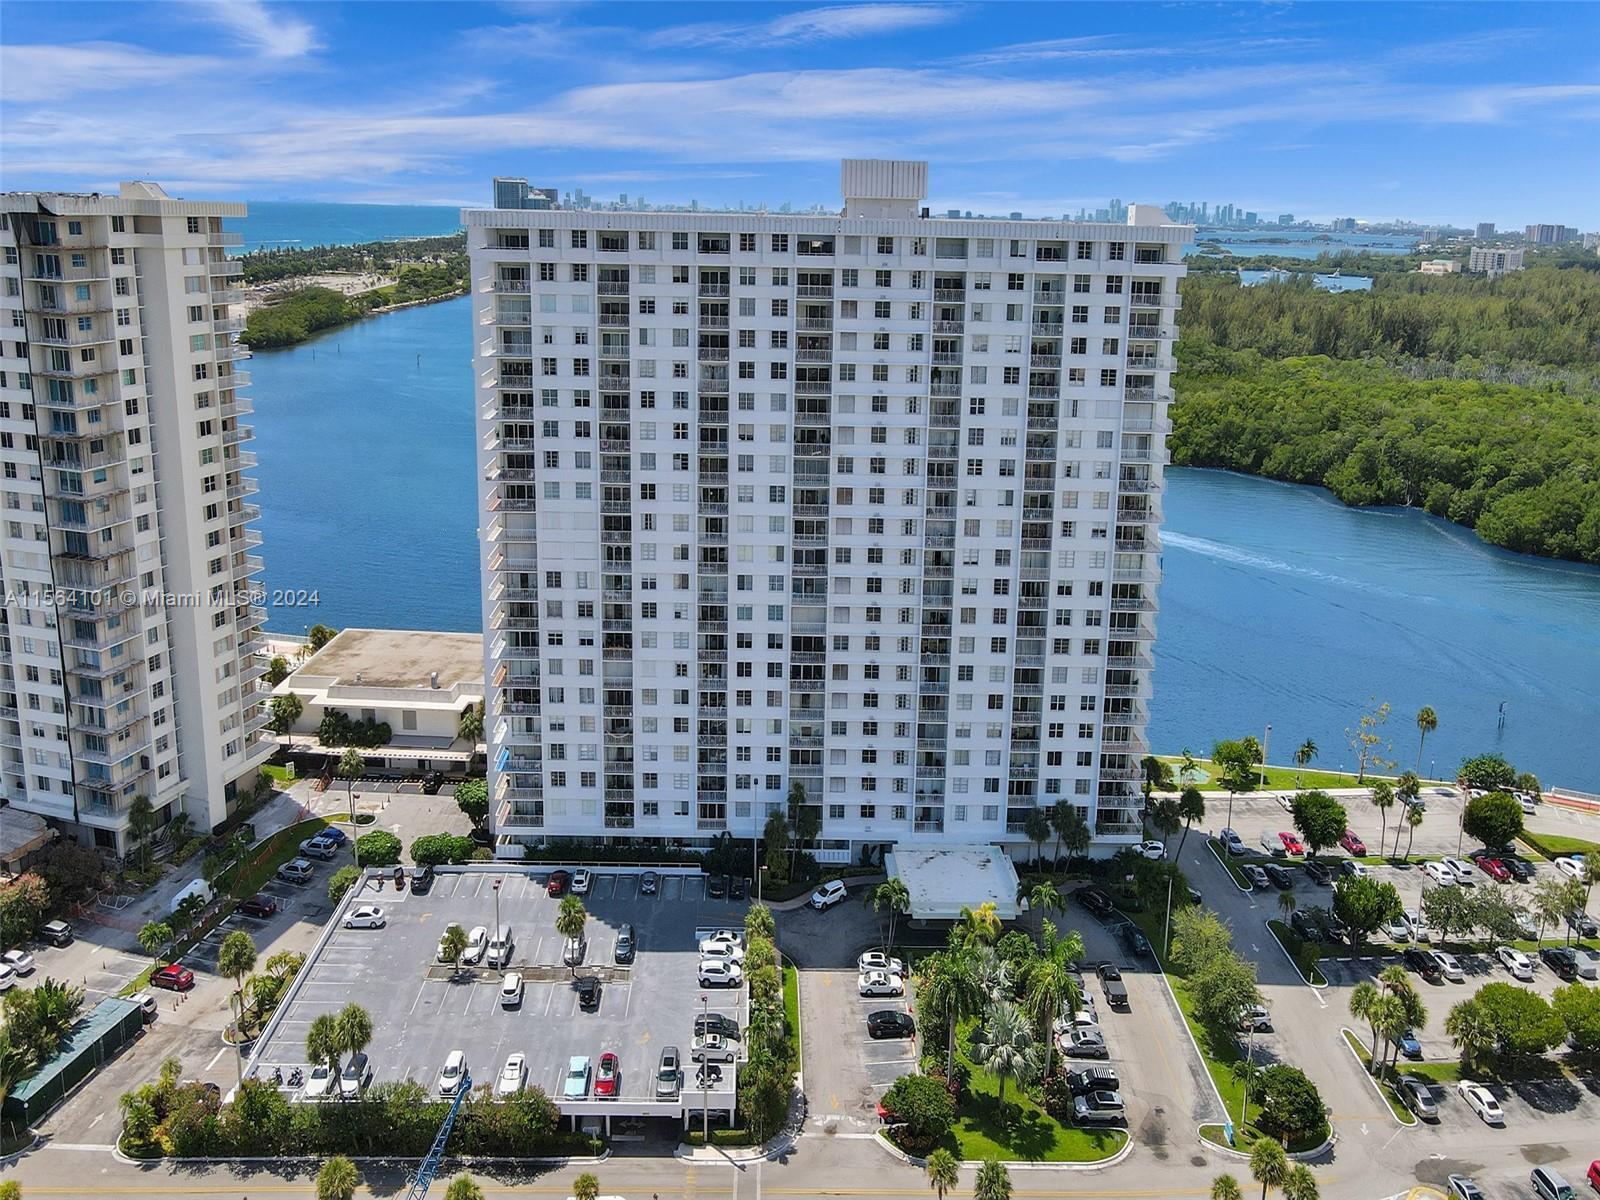 Photo of 500 Bayview Dr #617 in Sunny Isles Beach, FL